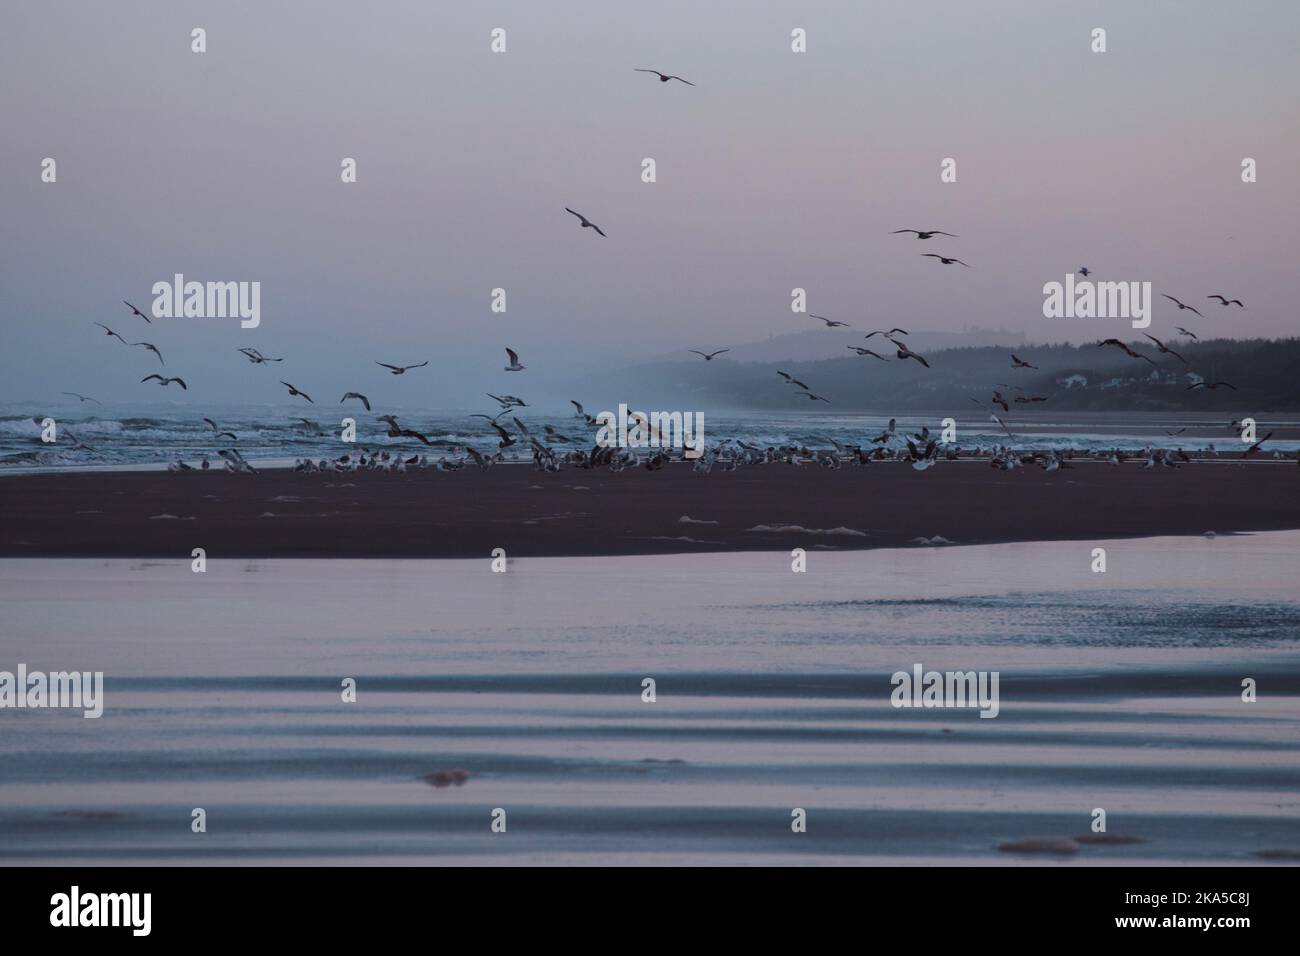 A large flock of birds takes off from a sand bar on the beach of Oregon during sunset. Stock Photo